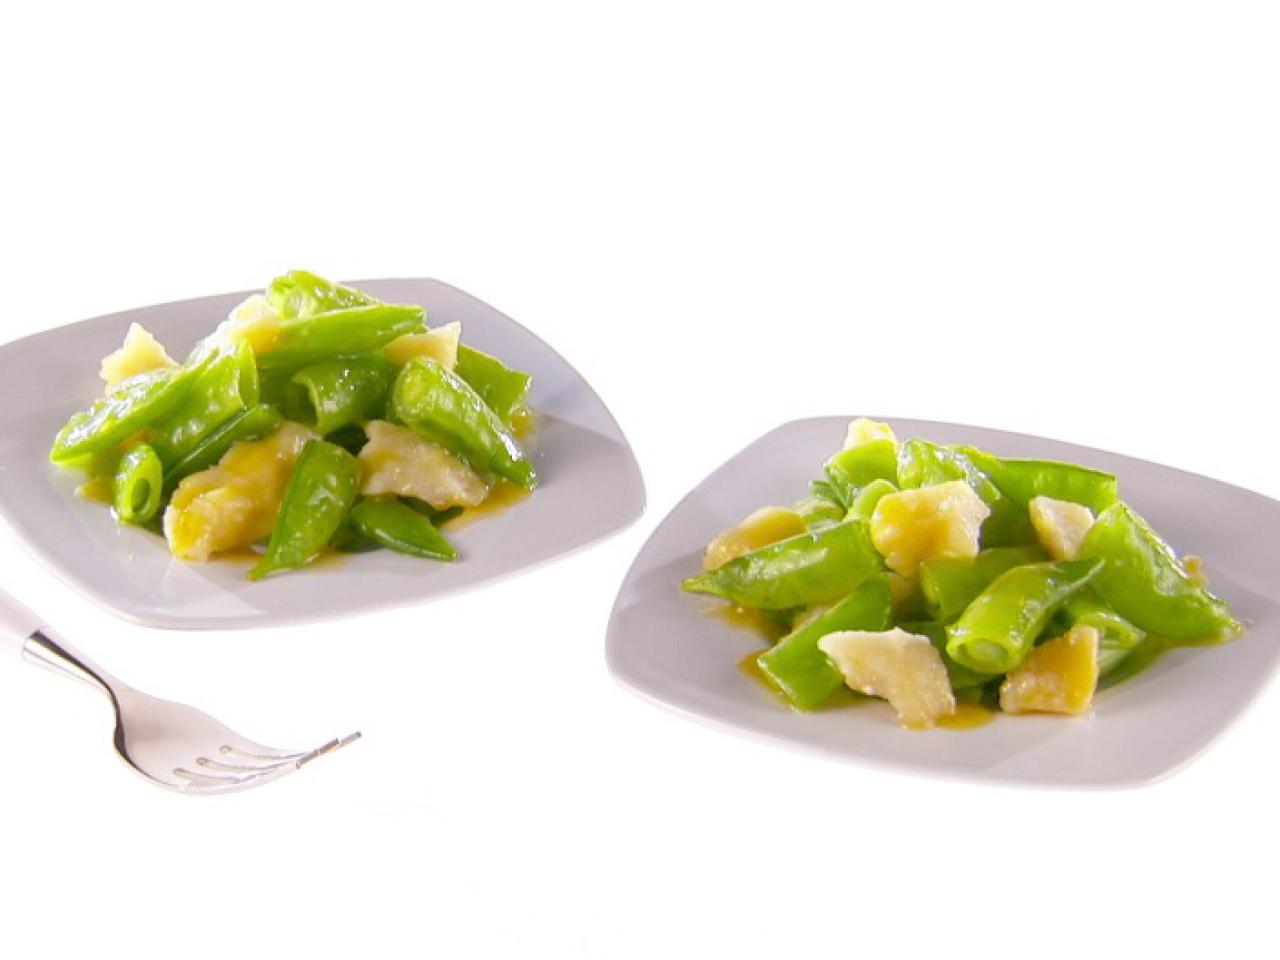 Snap Pea Salad With Walnuts and Parmesan Recipe - NYT Cooking